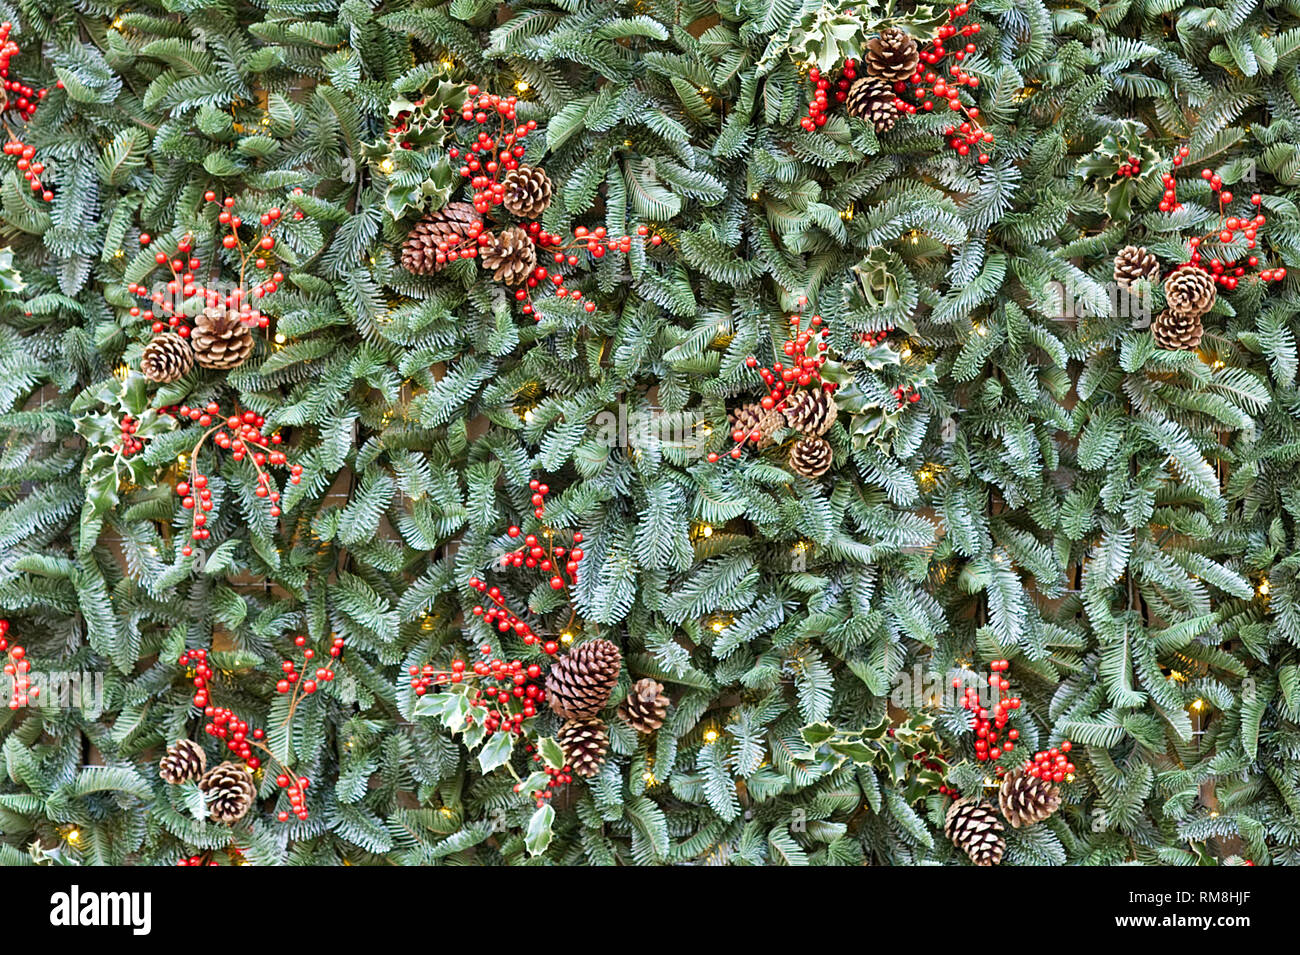 fir tree cones and berry decorations Stock Photo